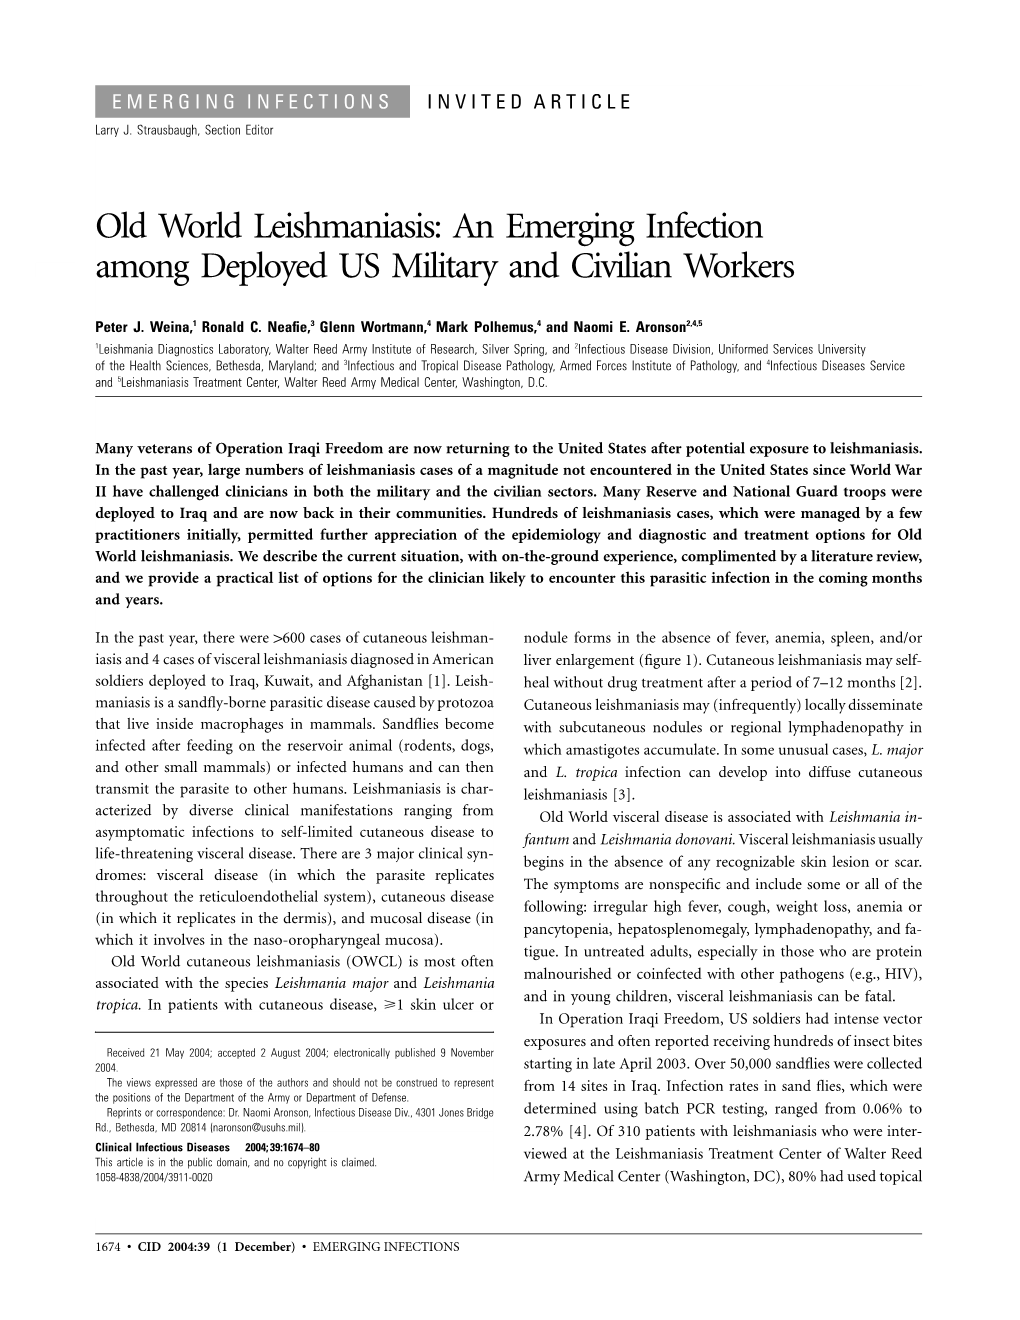 Old World Leishmaniasis: an Emerging Infection Among Deployed US Military and Civilian Workers